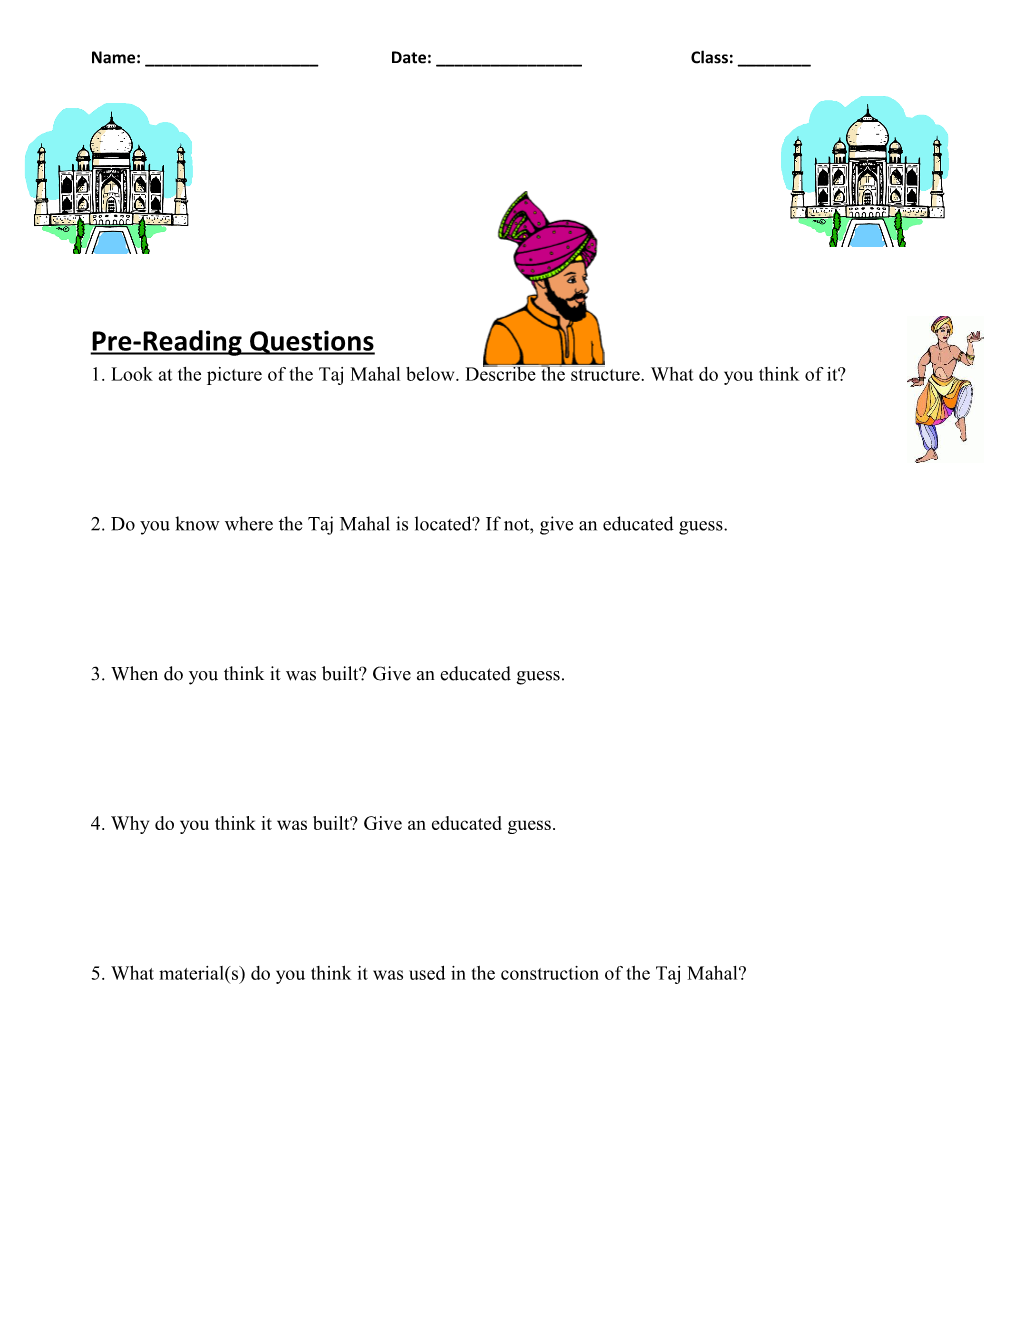 Pre-Reading Questions 1. Look at the Picture of the Taj Mahal Below. Describe the Structure